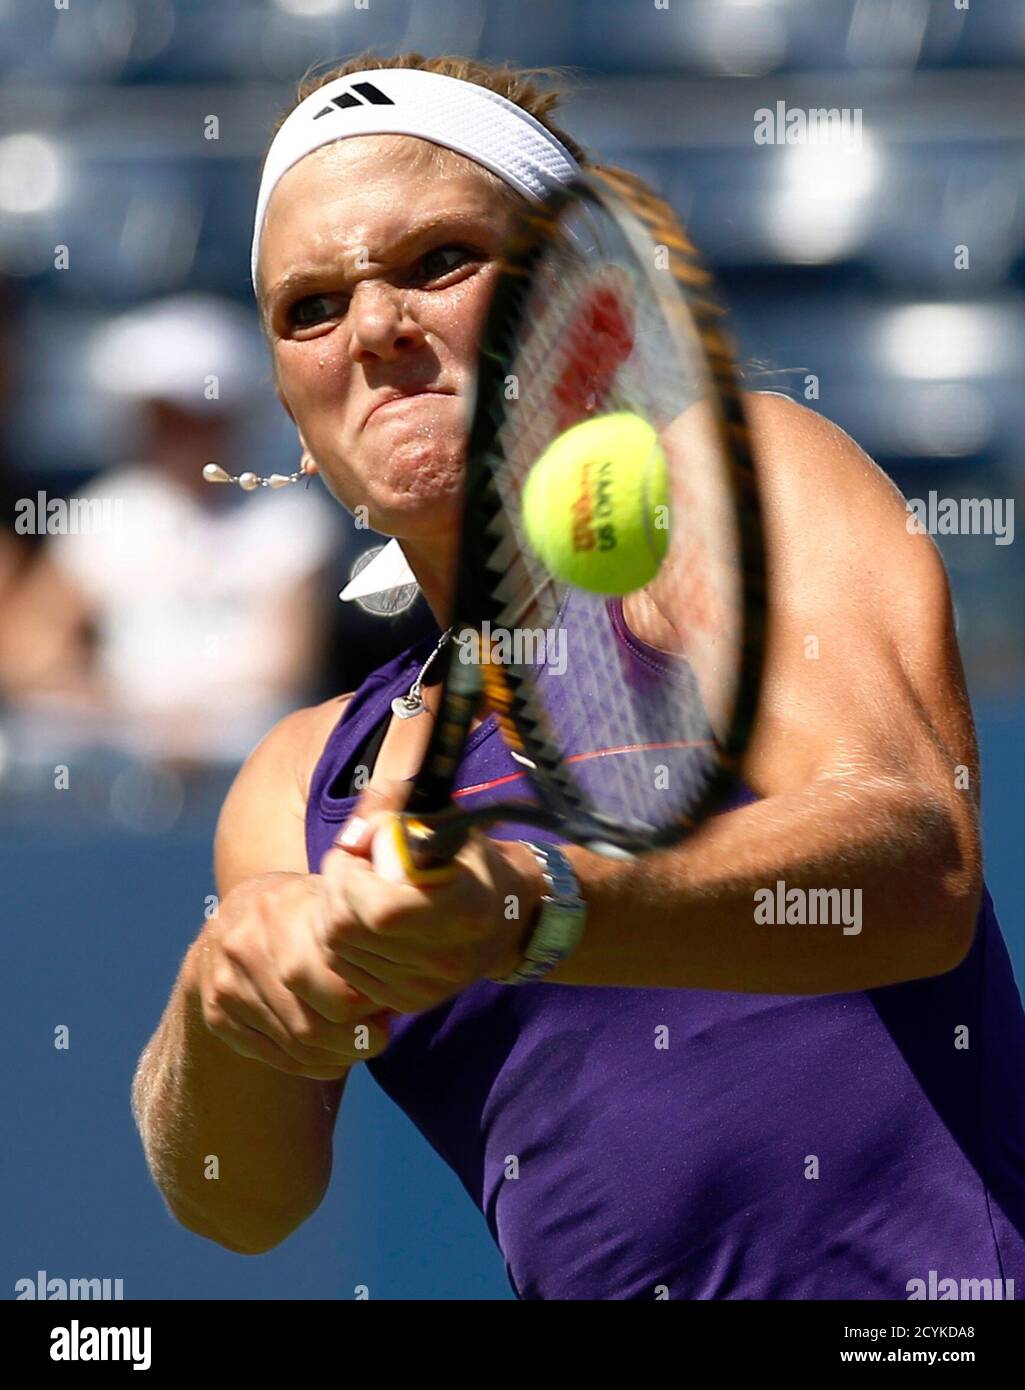 Melanie Oudin of the U.S. hits a return to Olga Savchuk of Ukraine during the U.S. Open tennis tournament in New York, August 30, 2010. REUTERS/Kevin Lamarque (UNITED STATES - Tags: SPORT TENNIS) Foto de stock